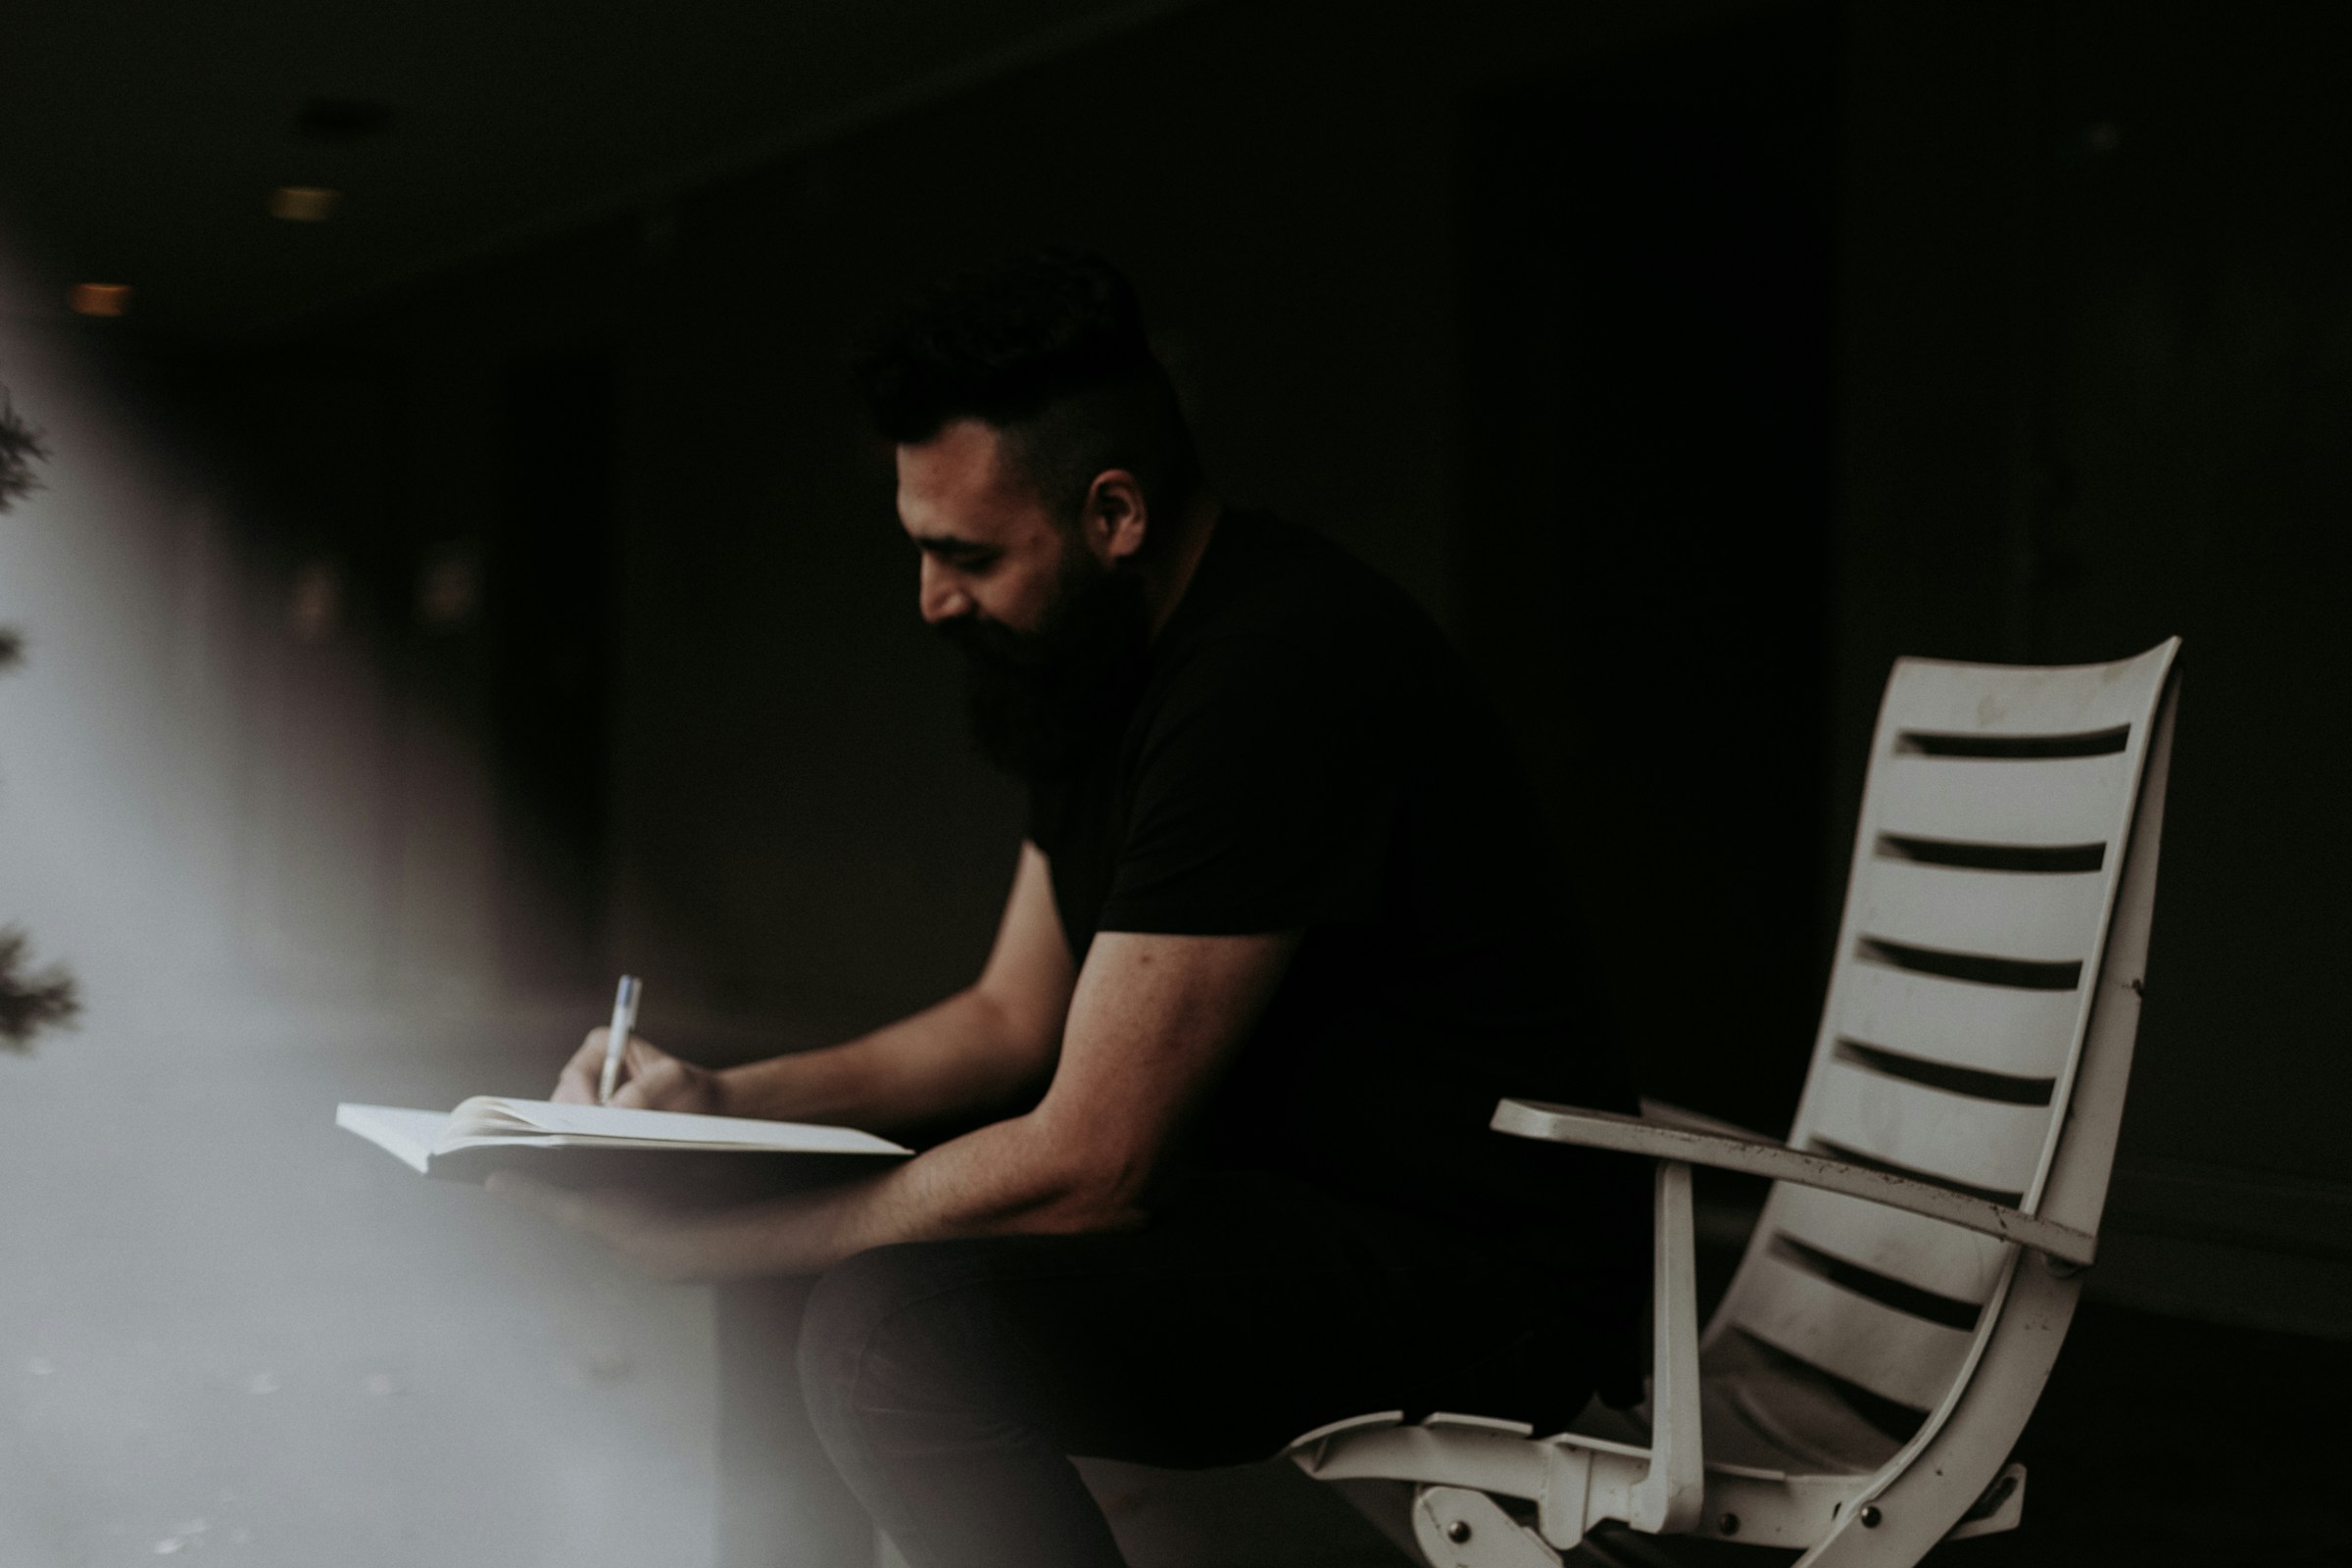 A man writing in a notebook | Source: Unsplash